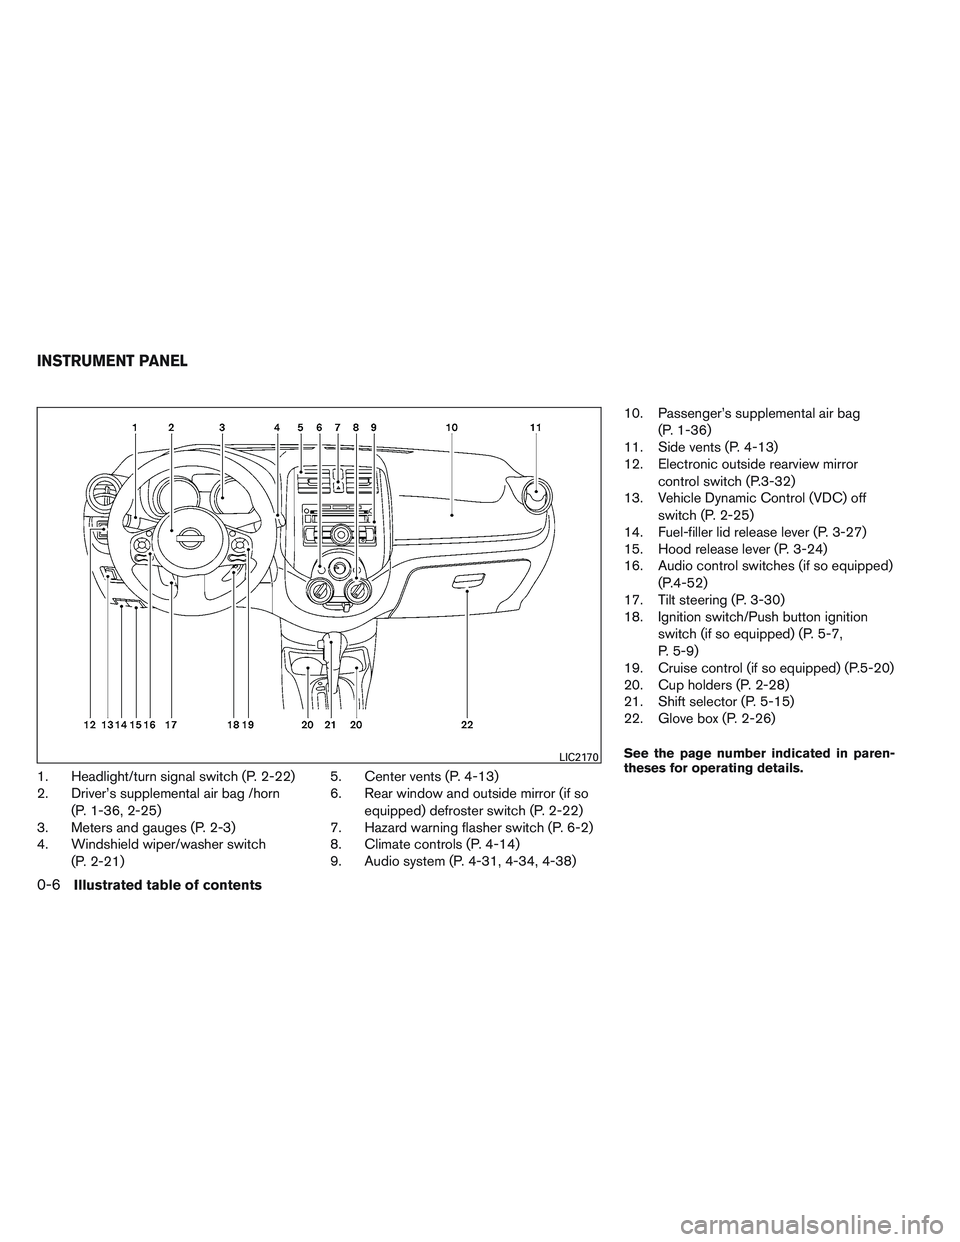 NISSAN VERSA 2013 User Guide 1. Headlight/turn signal switch (P. 2-22)
2. Driver’s supplemental air bag /horn(P. 1-36, 2-25)
3. Meters and gauges (P. 2-3)
4. Windshield wiper/washer switch
(P. 2-21) 5. Center vents (P. 4-13)
6.